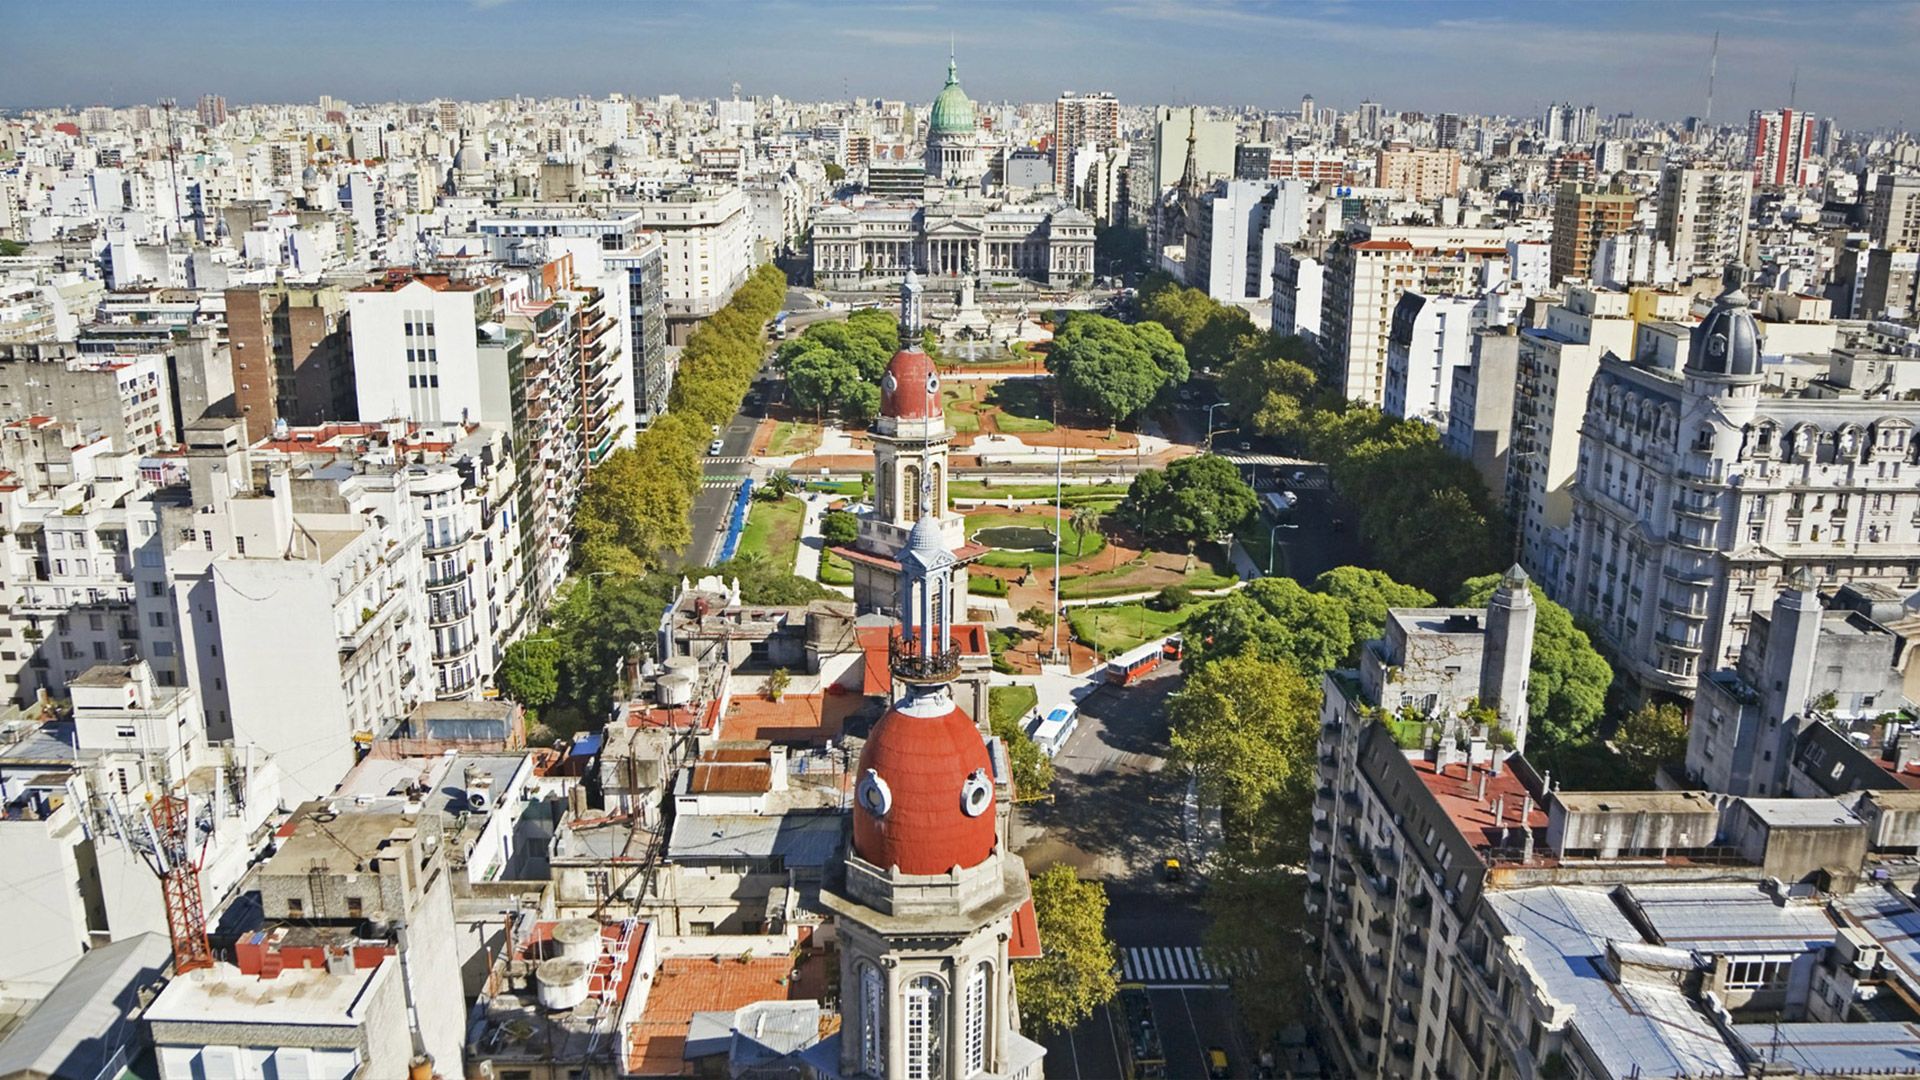 With PayPorter, you can make fast, easy and safe money transfers to Argentina at the most affordable prices!